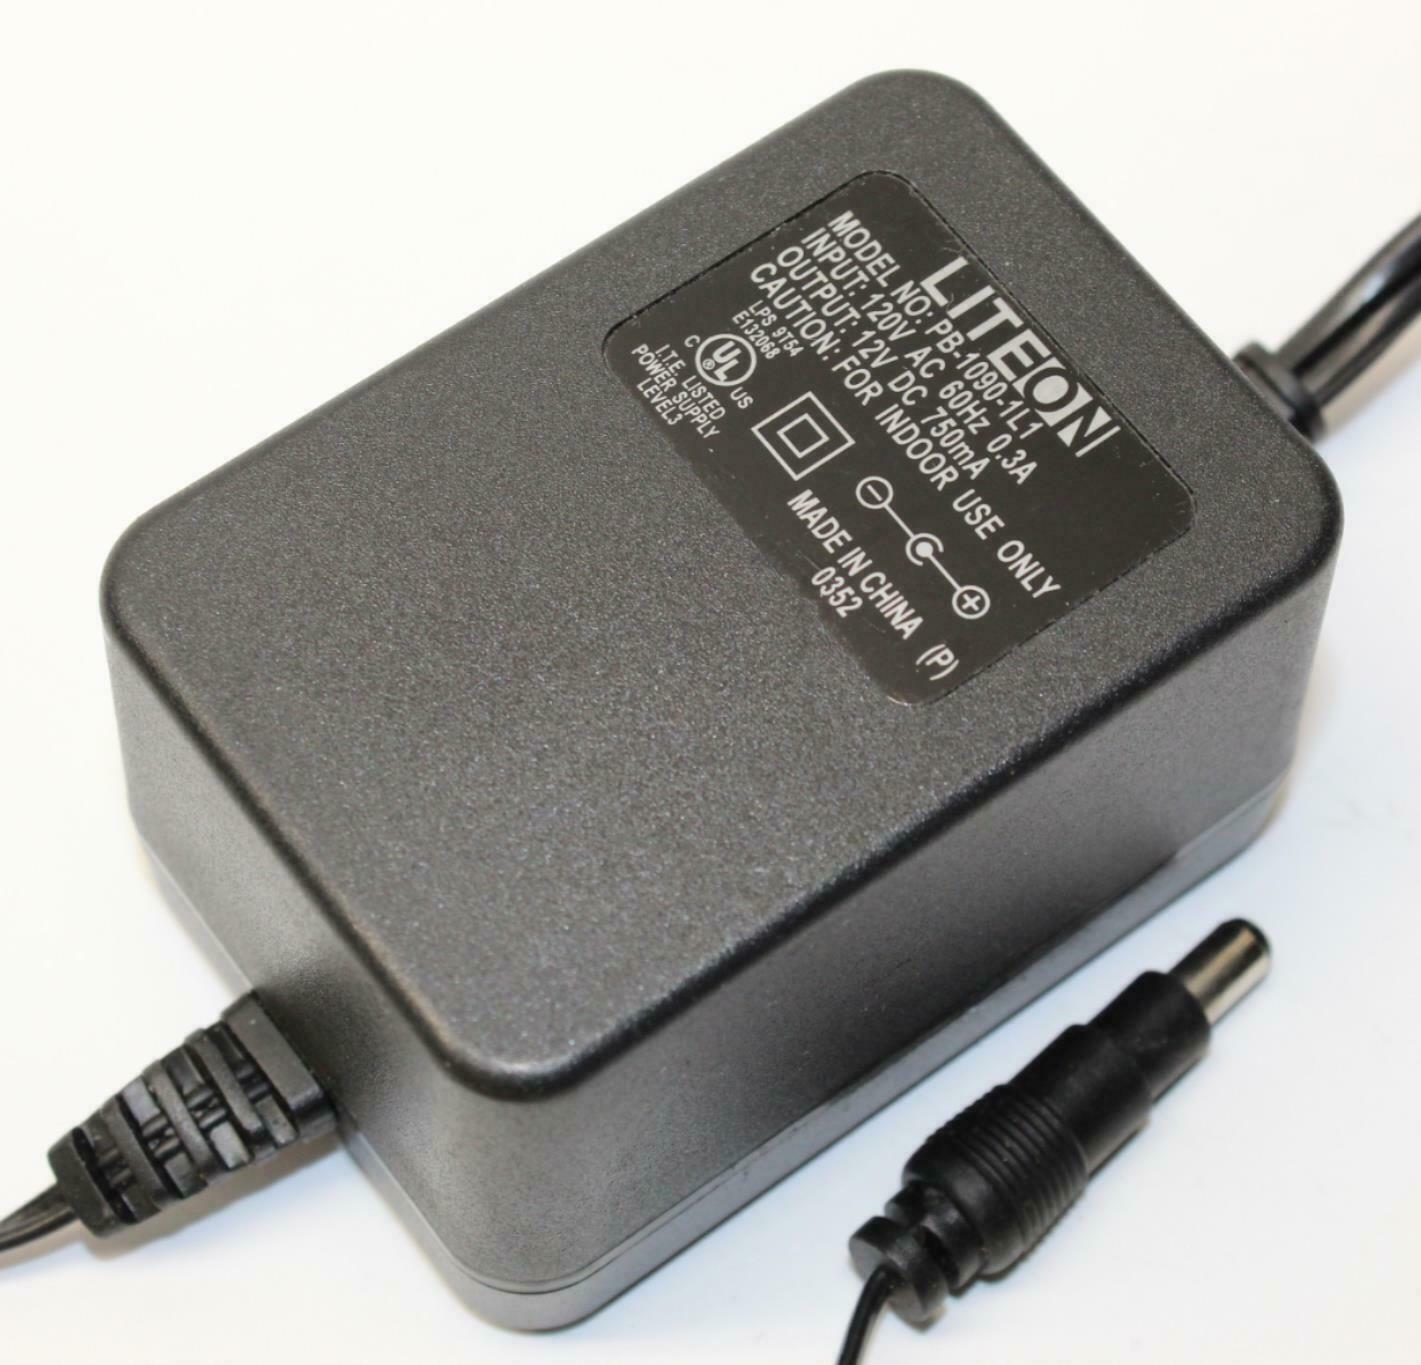 Lite-On PB-1090-1L1 AC Adapter Power Supply Cord Cable Charger Transformer Genuine Original